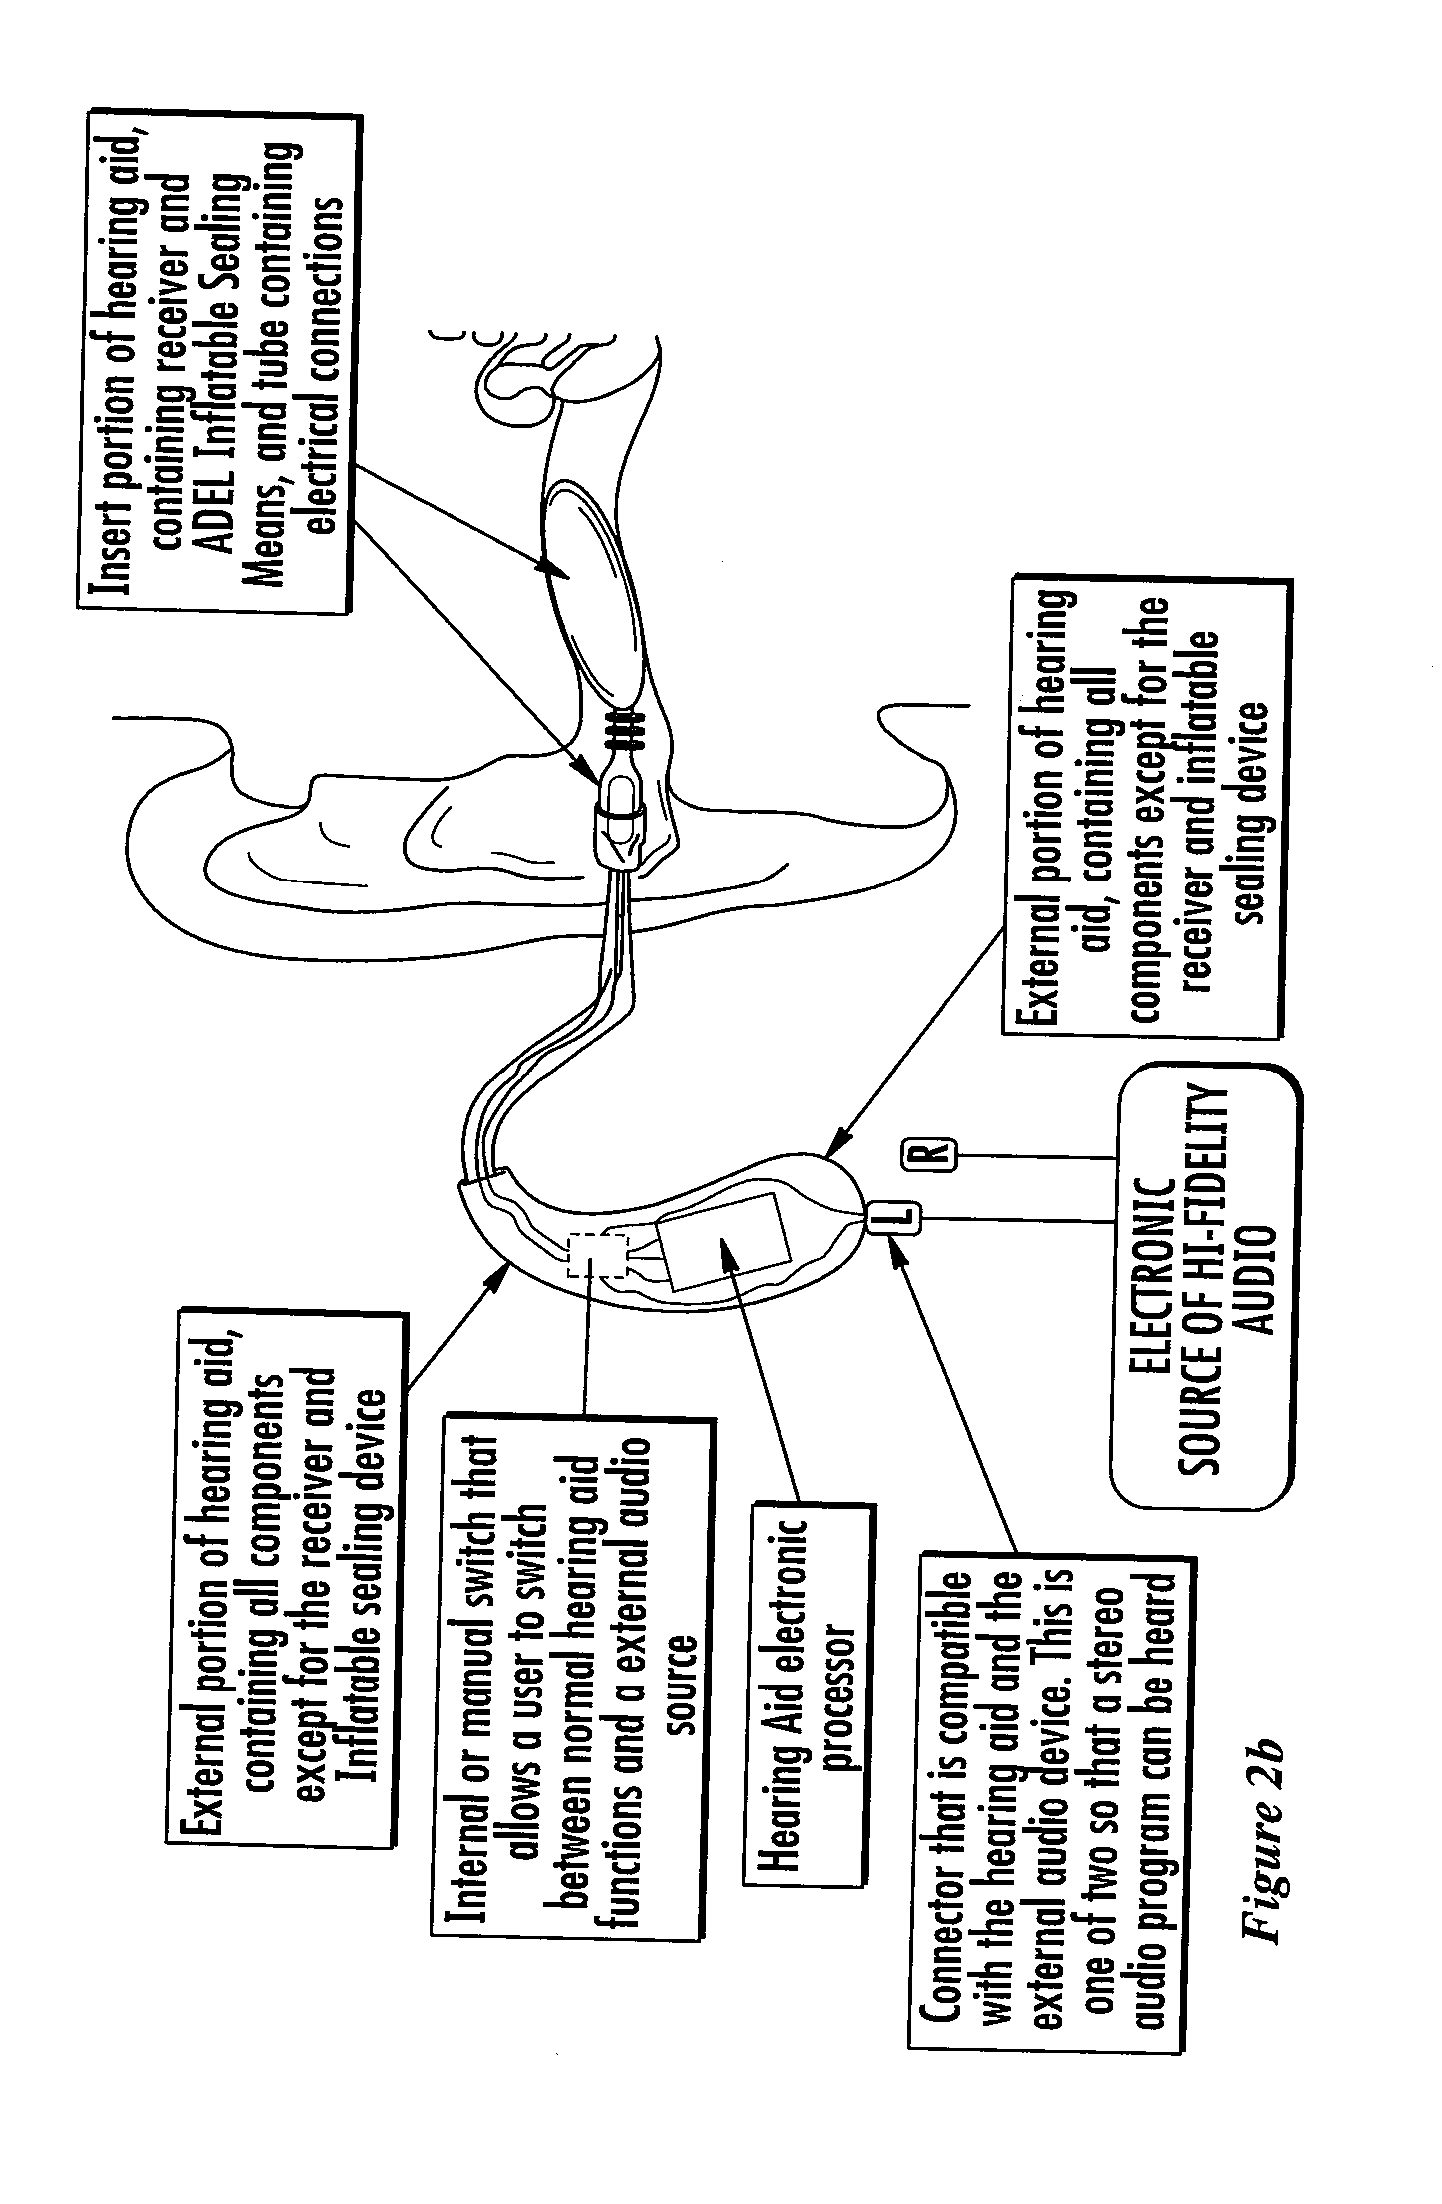 Hearing Device System and Method